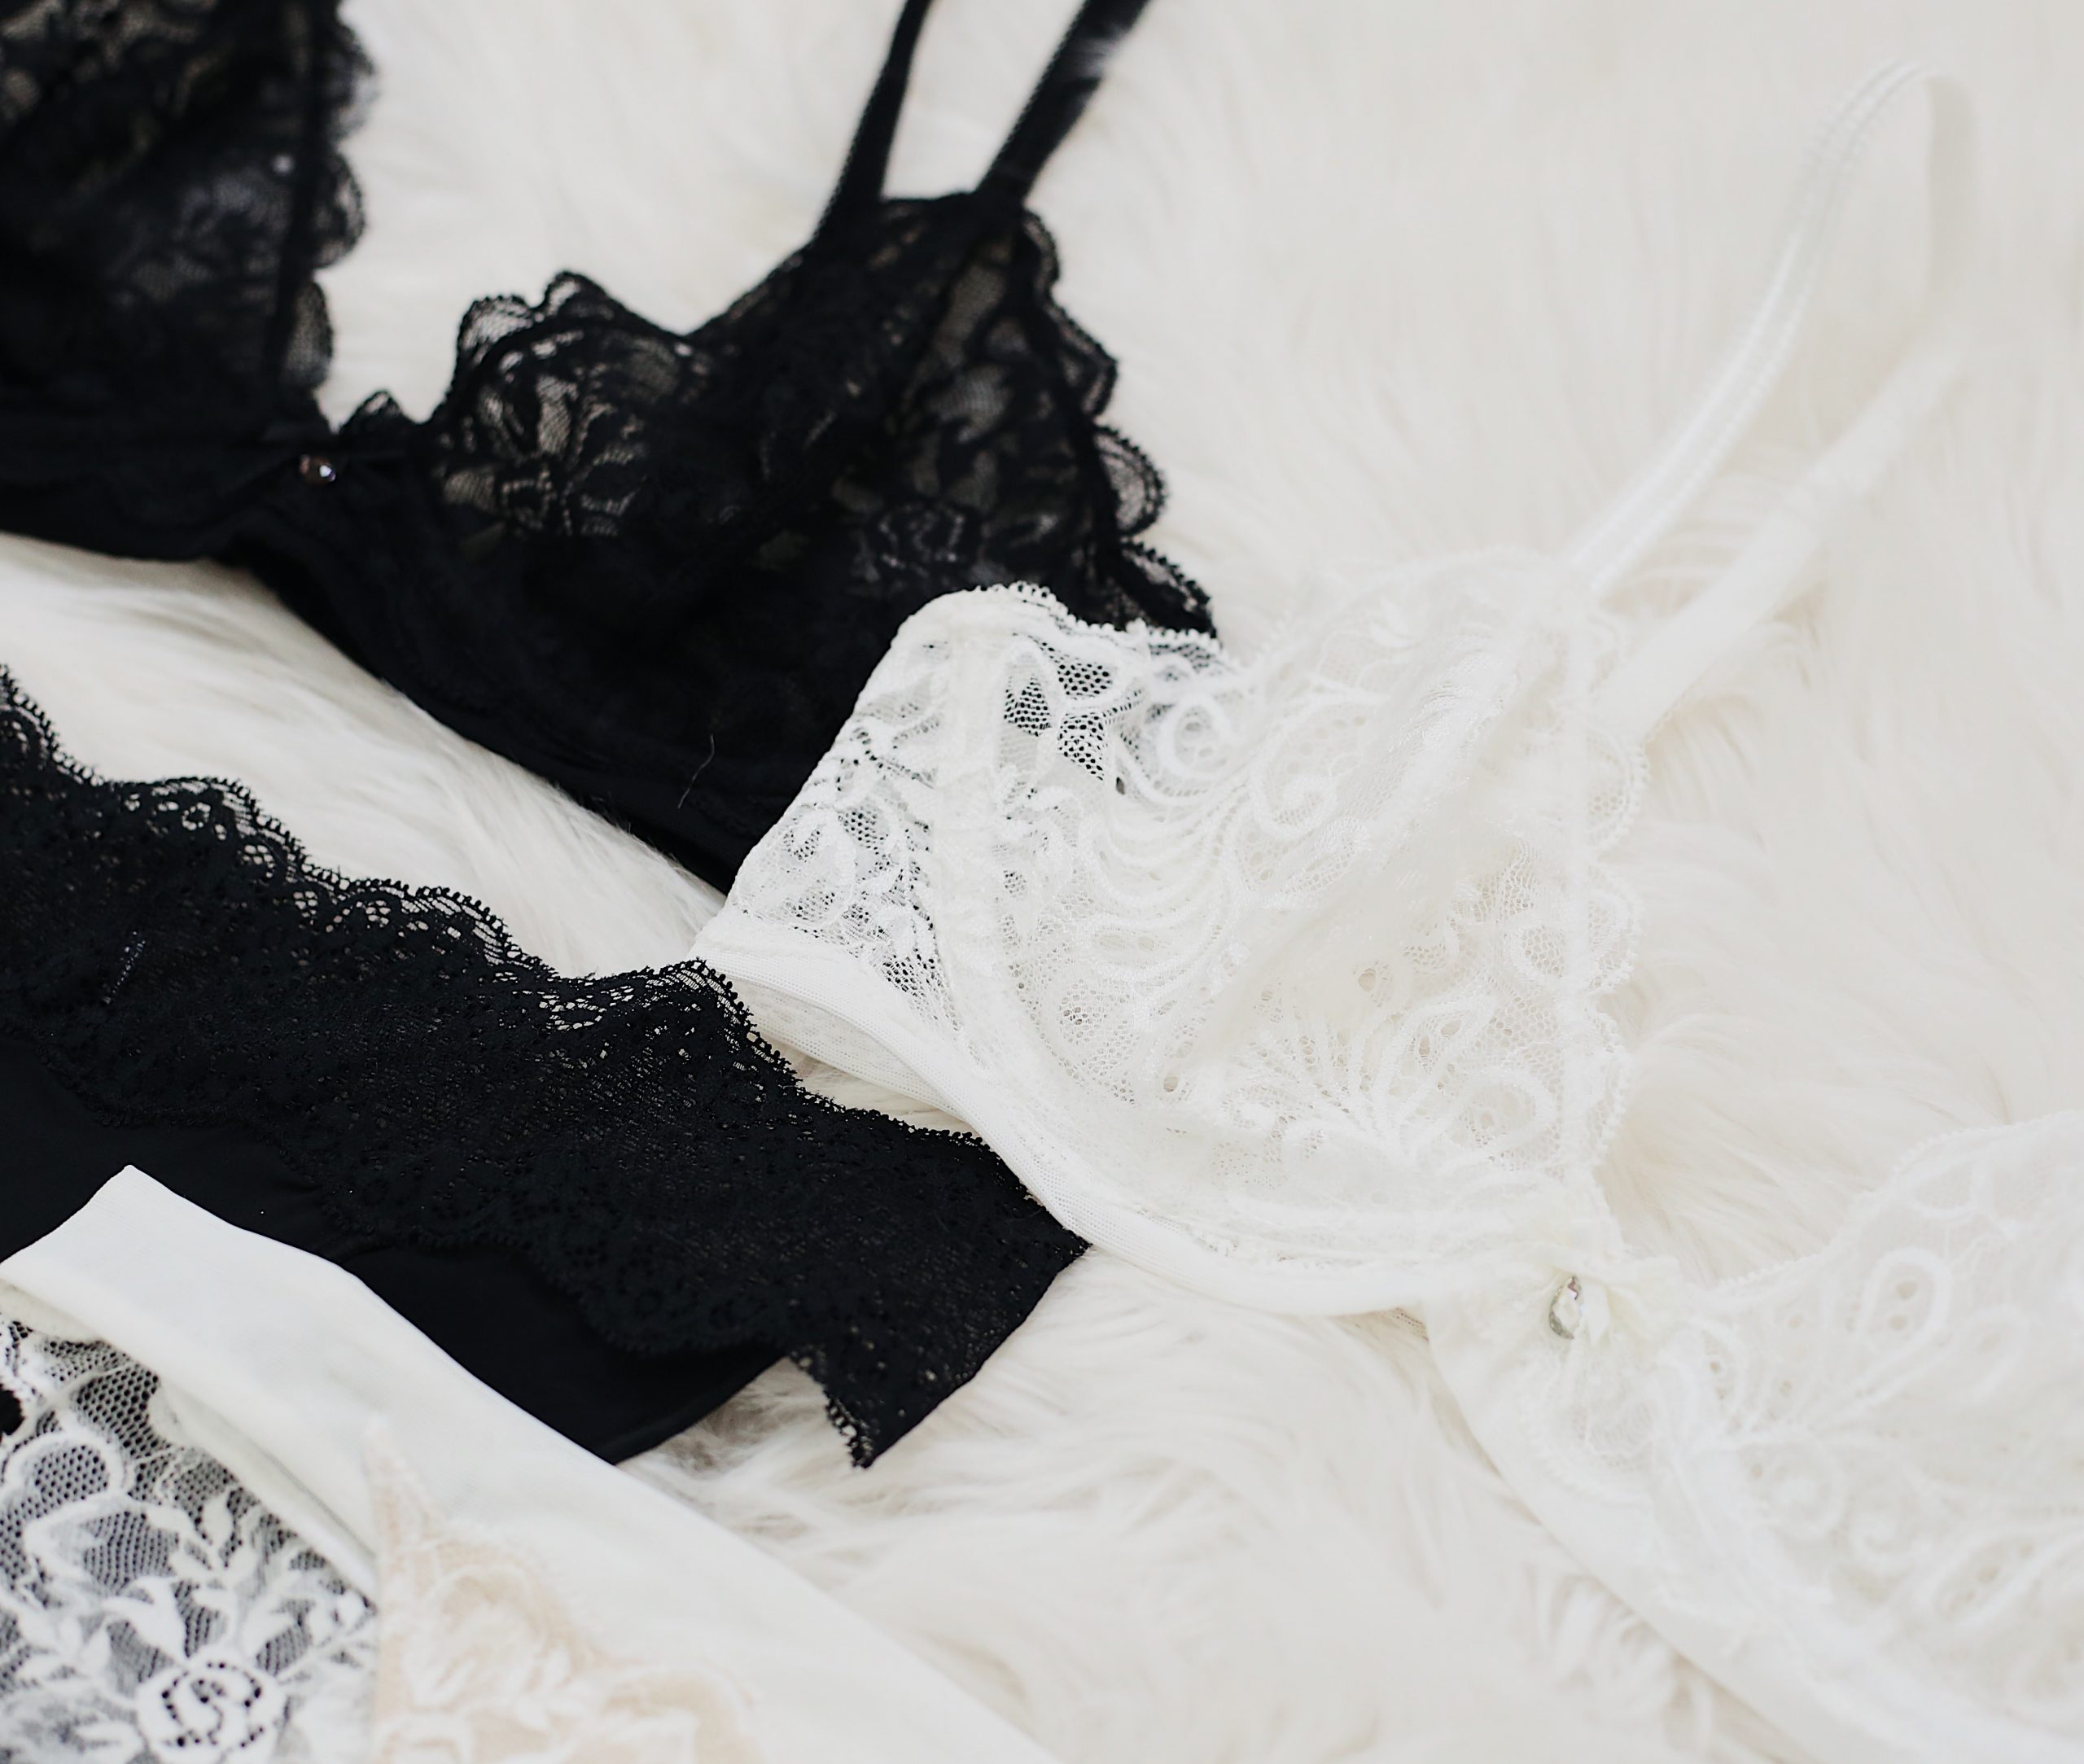 lace lingerie, sexy but classy lingerie, peek-a-boo lace bralettes